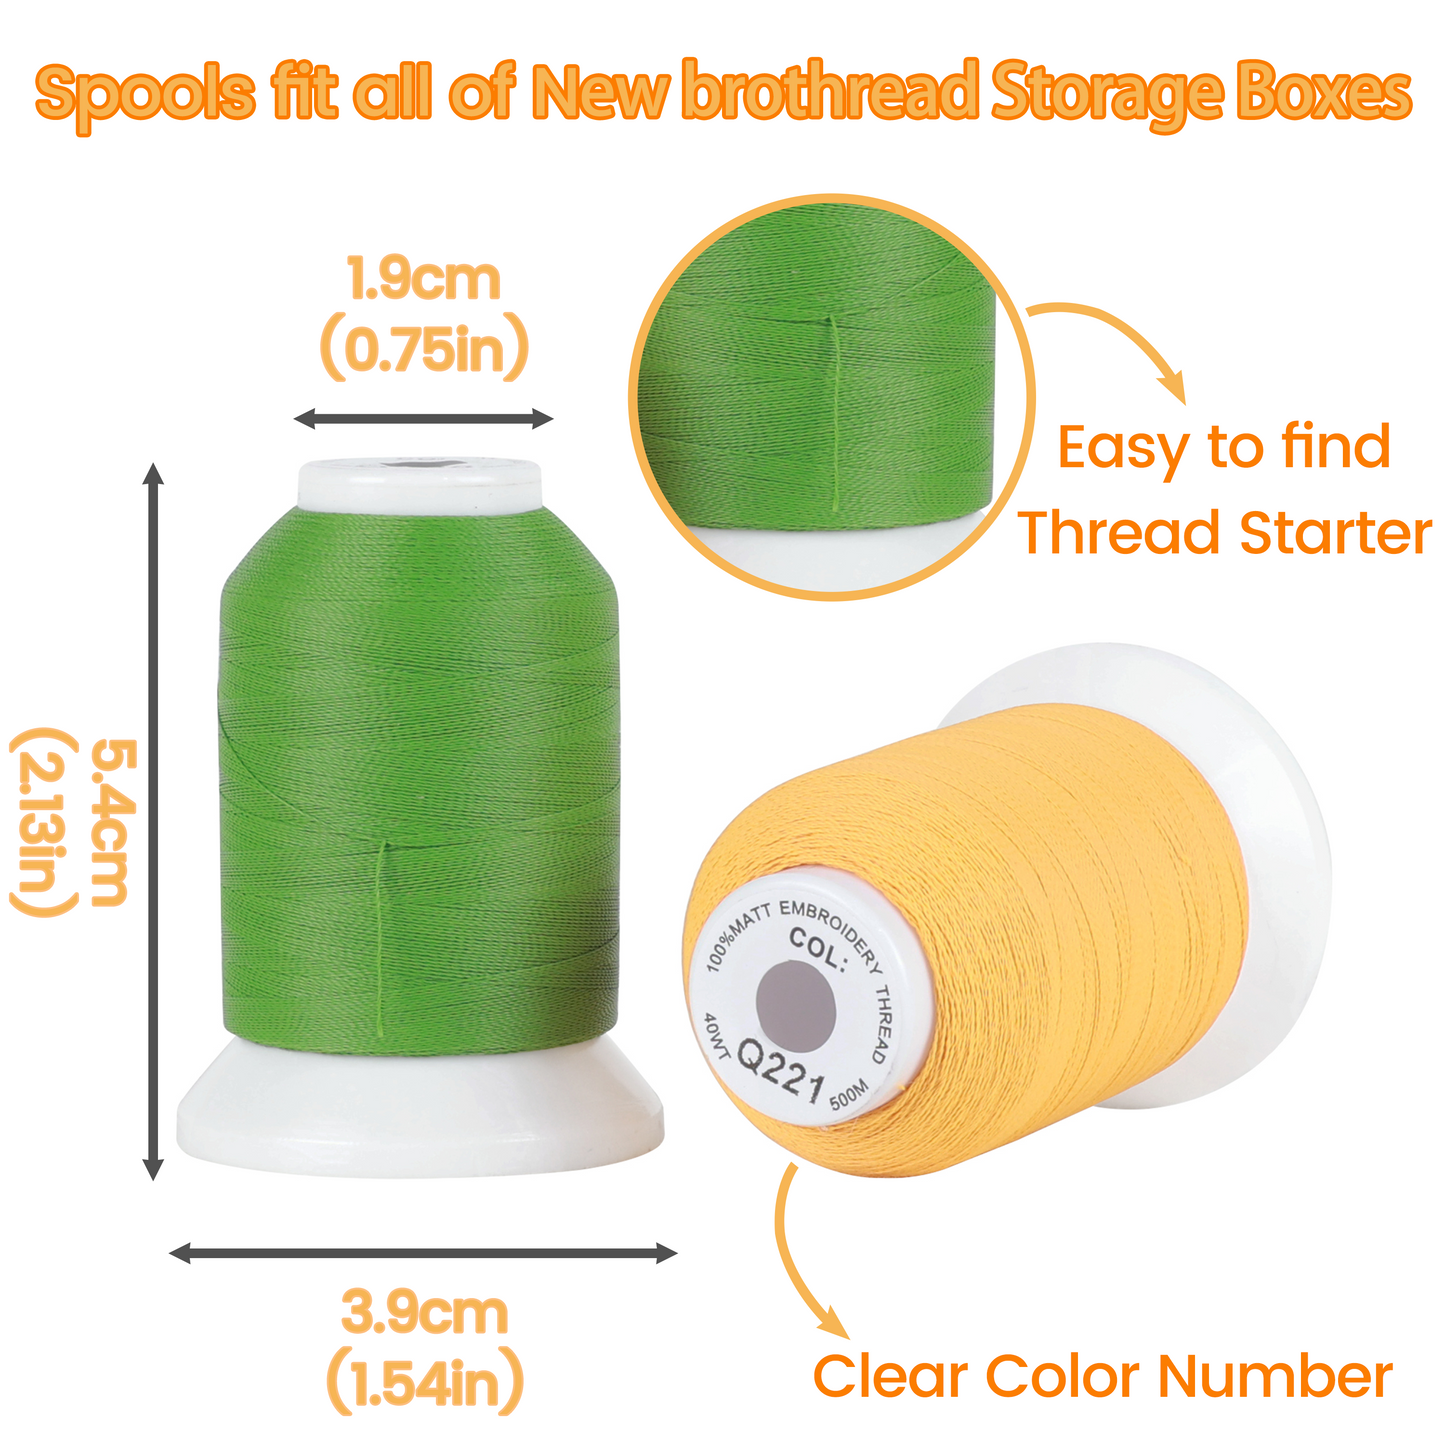 100% Frosted Matt Embroidery Machine Thread 72 Spools 40WT Each Spool 500M (550Y) for Brother Babylock Janome Singer Pfaff Husqvarna Bernina Embroidery and Sewing Machines-Made by New brothread